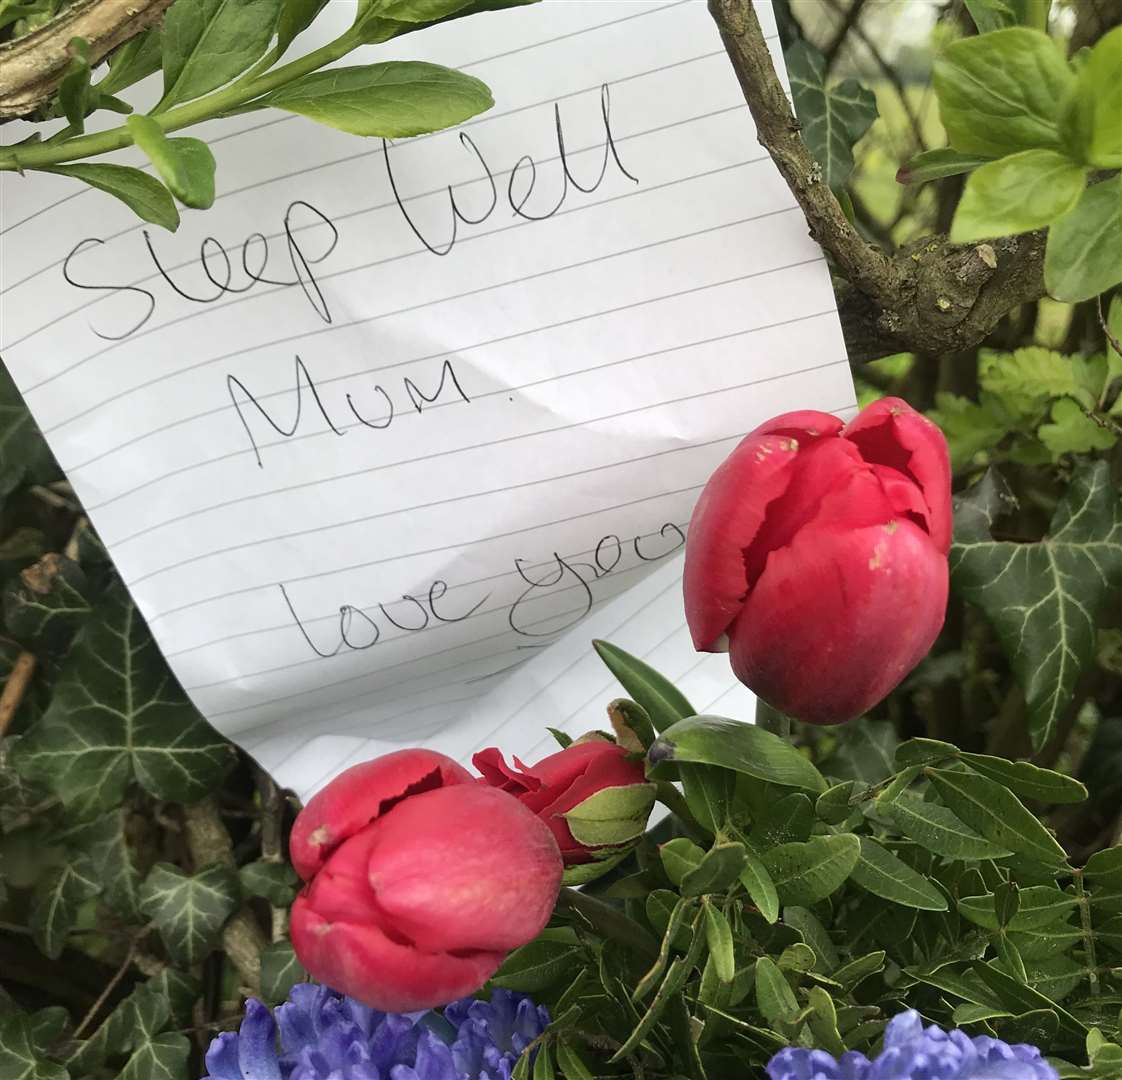 A poignant note was left by the roadside in memory of Sylvia Whibley